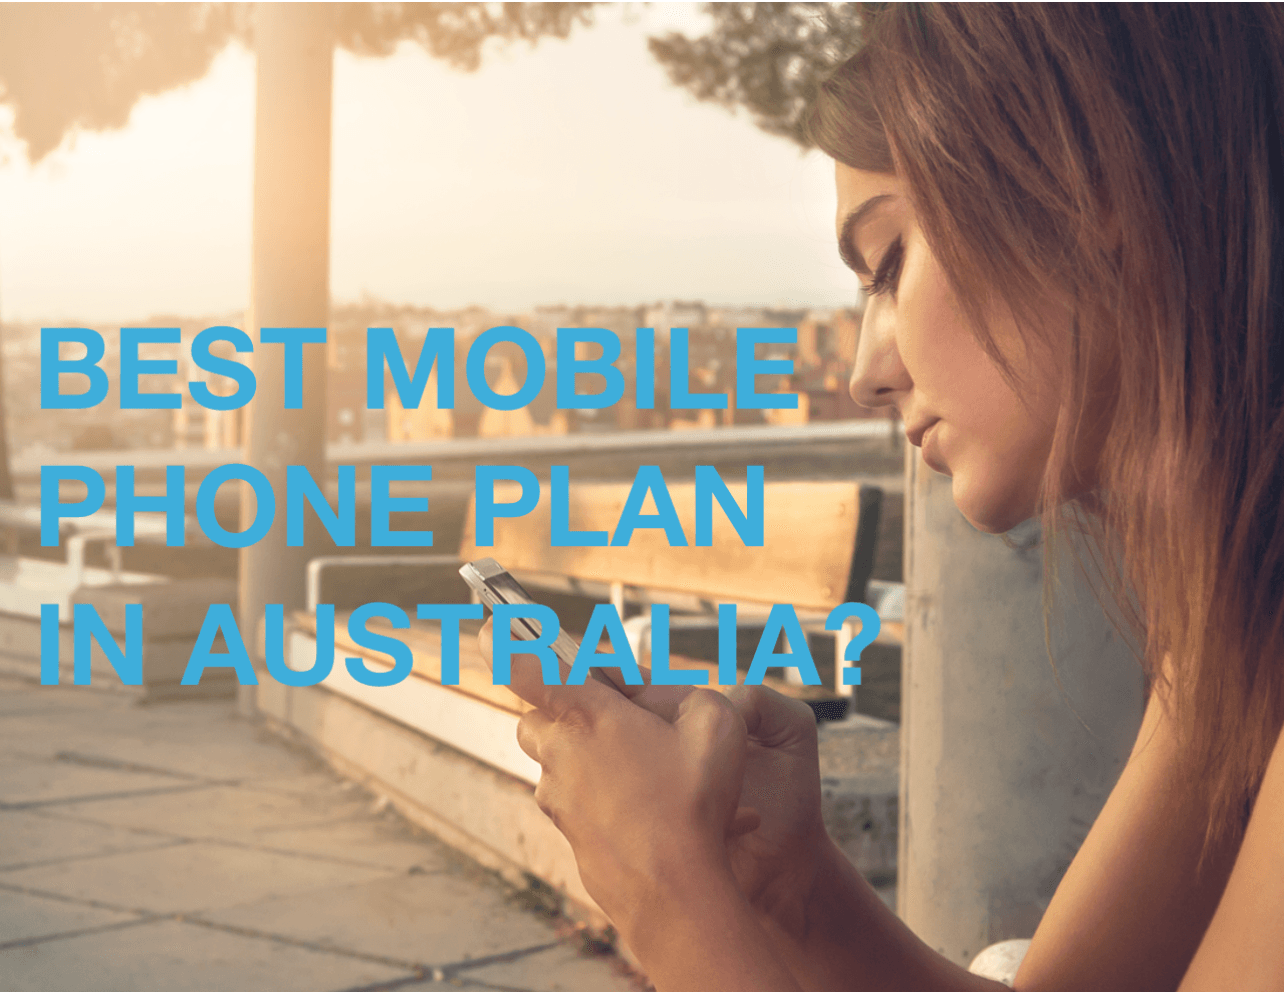 Woman hold a mobile phone deciding where to find the best mobile deal in Australia